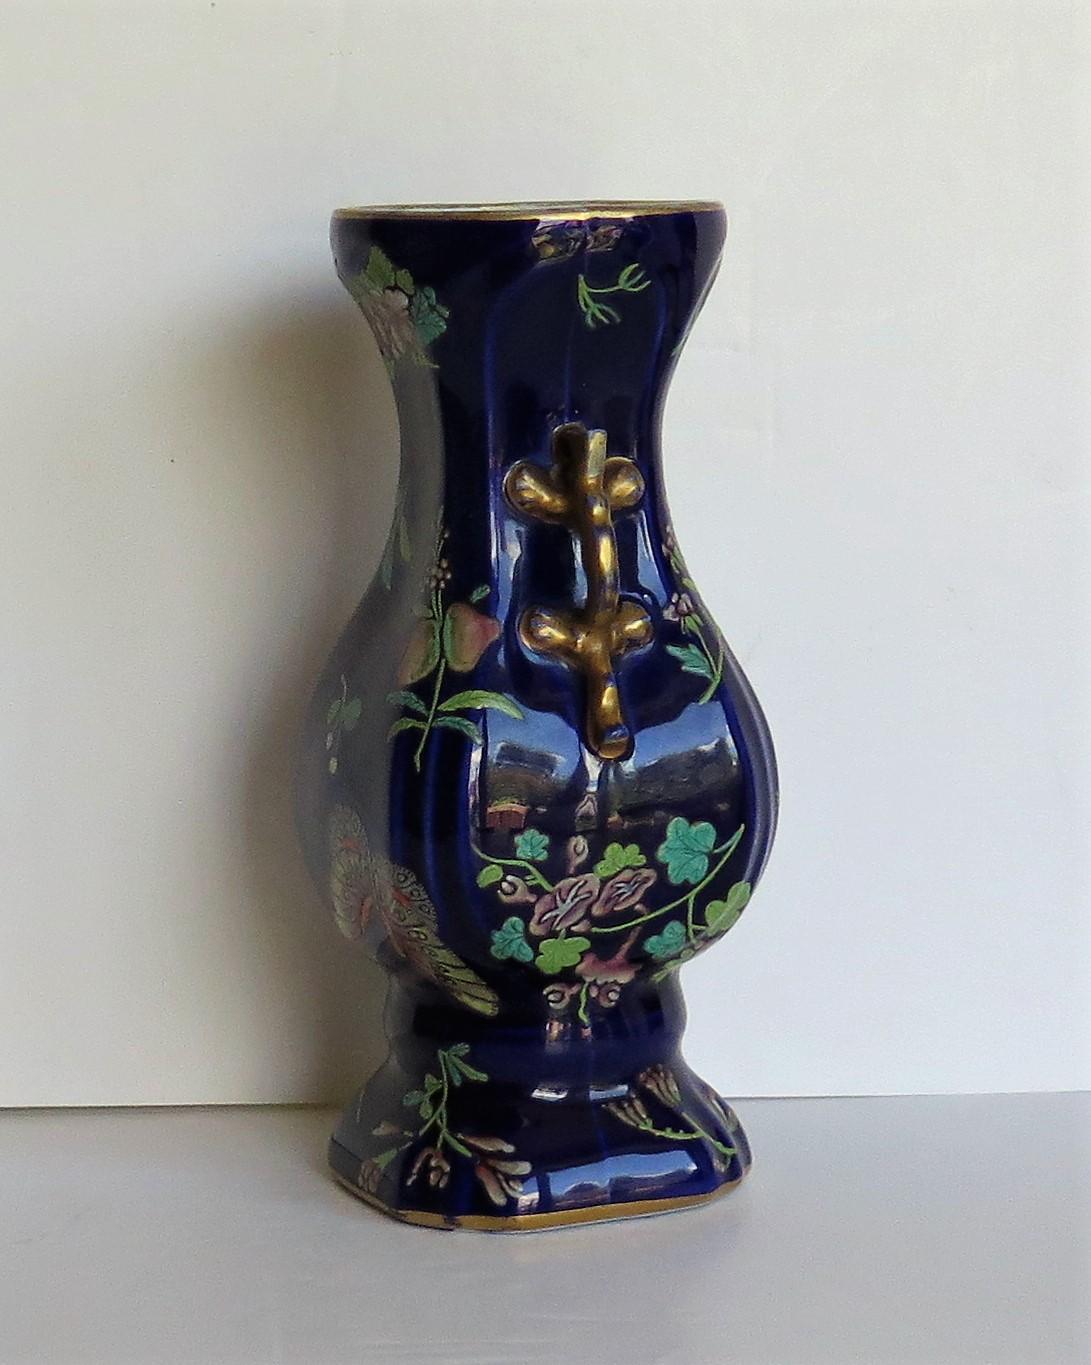 Chinoiserie Early Ironstone Vase Finely Hand Painted, English Staffordshire, circa 1825